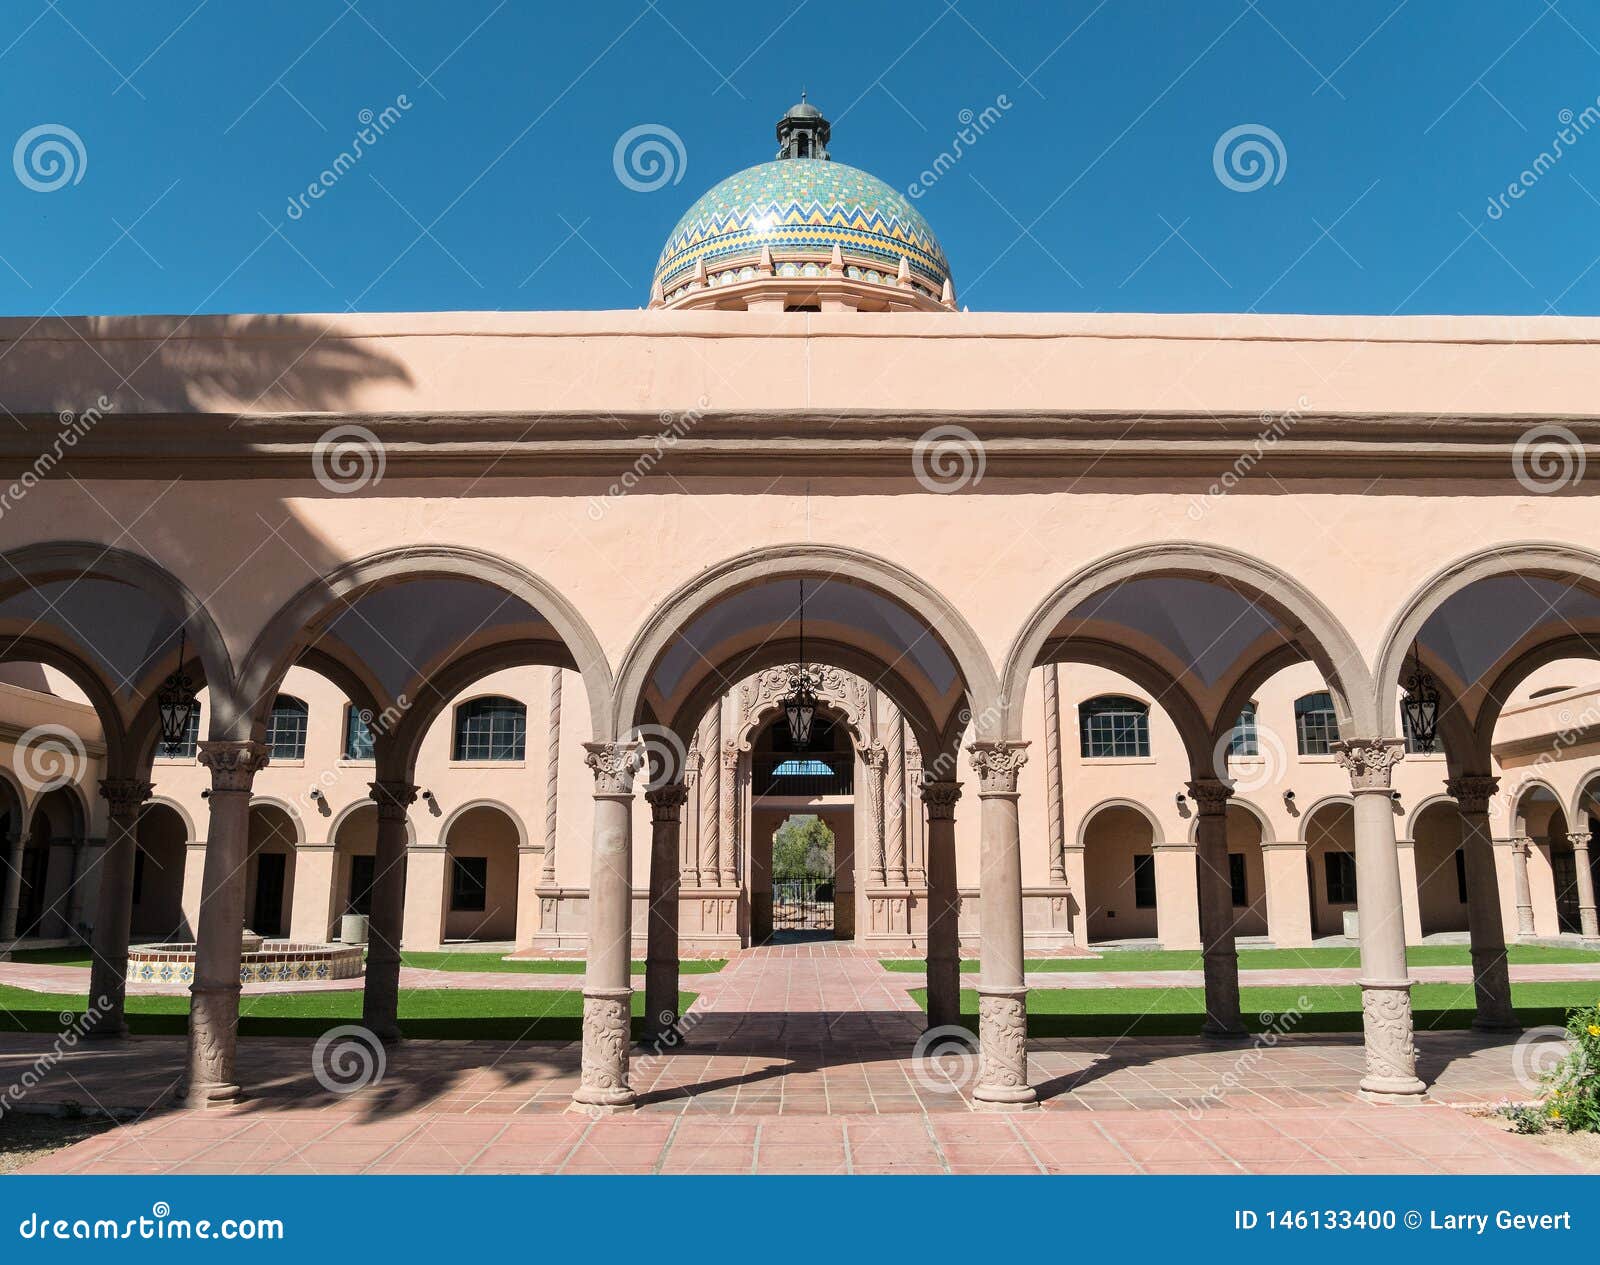 old pima county courthouse in tucson